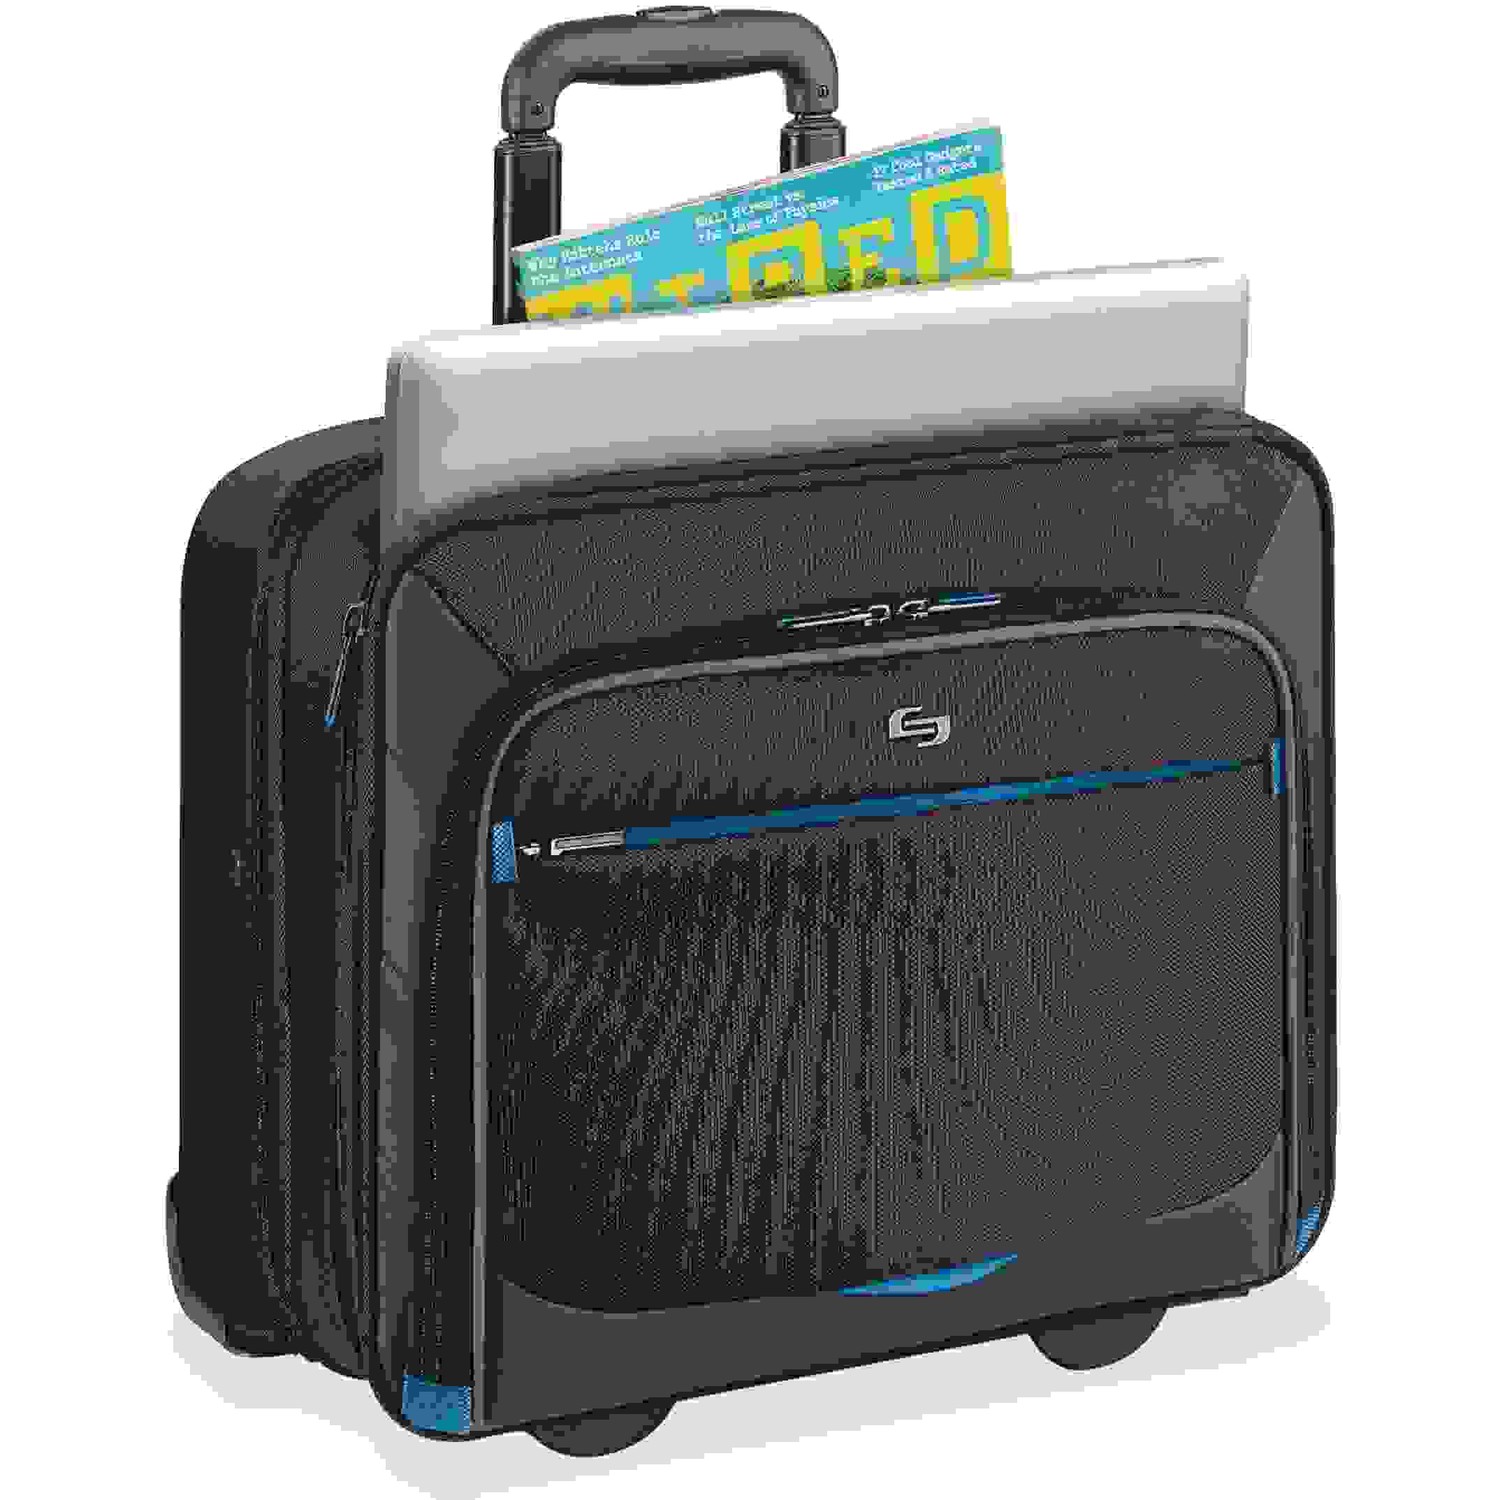 Active Rolling Overnighter Case, 7.75" x 14.5" x 14.5", Black